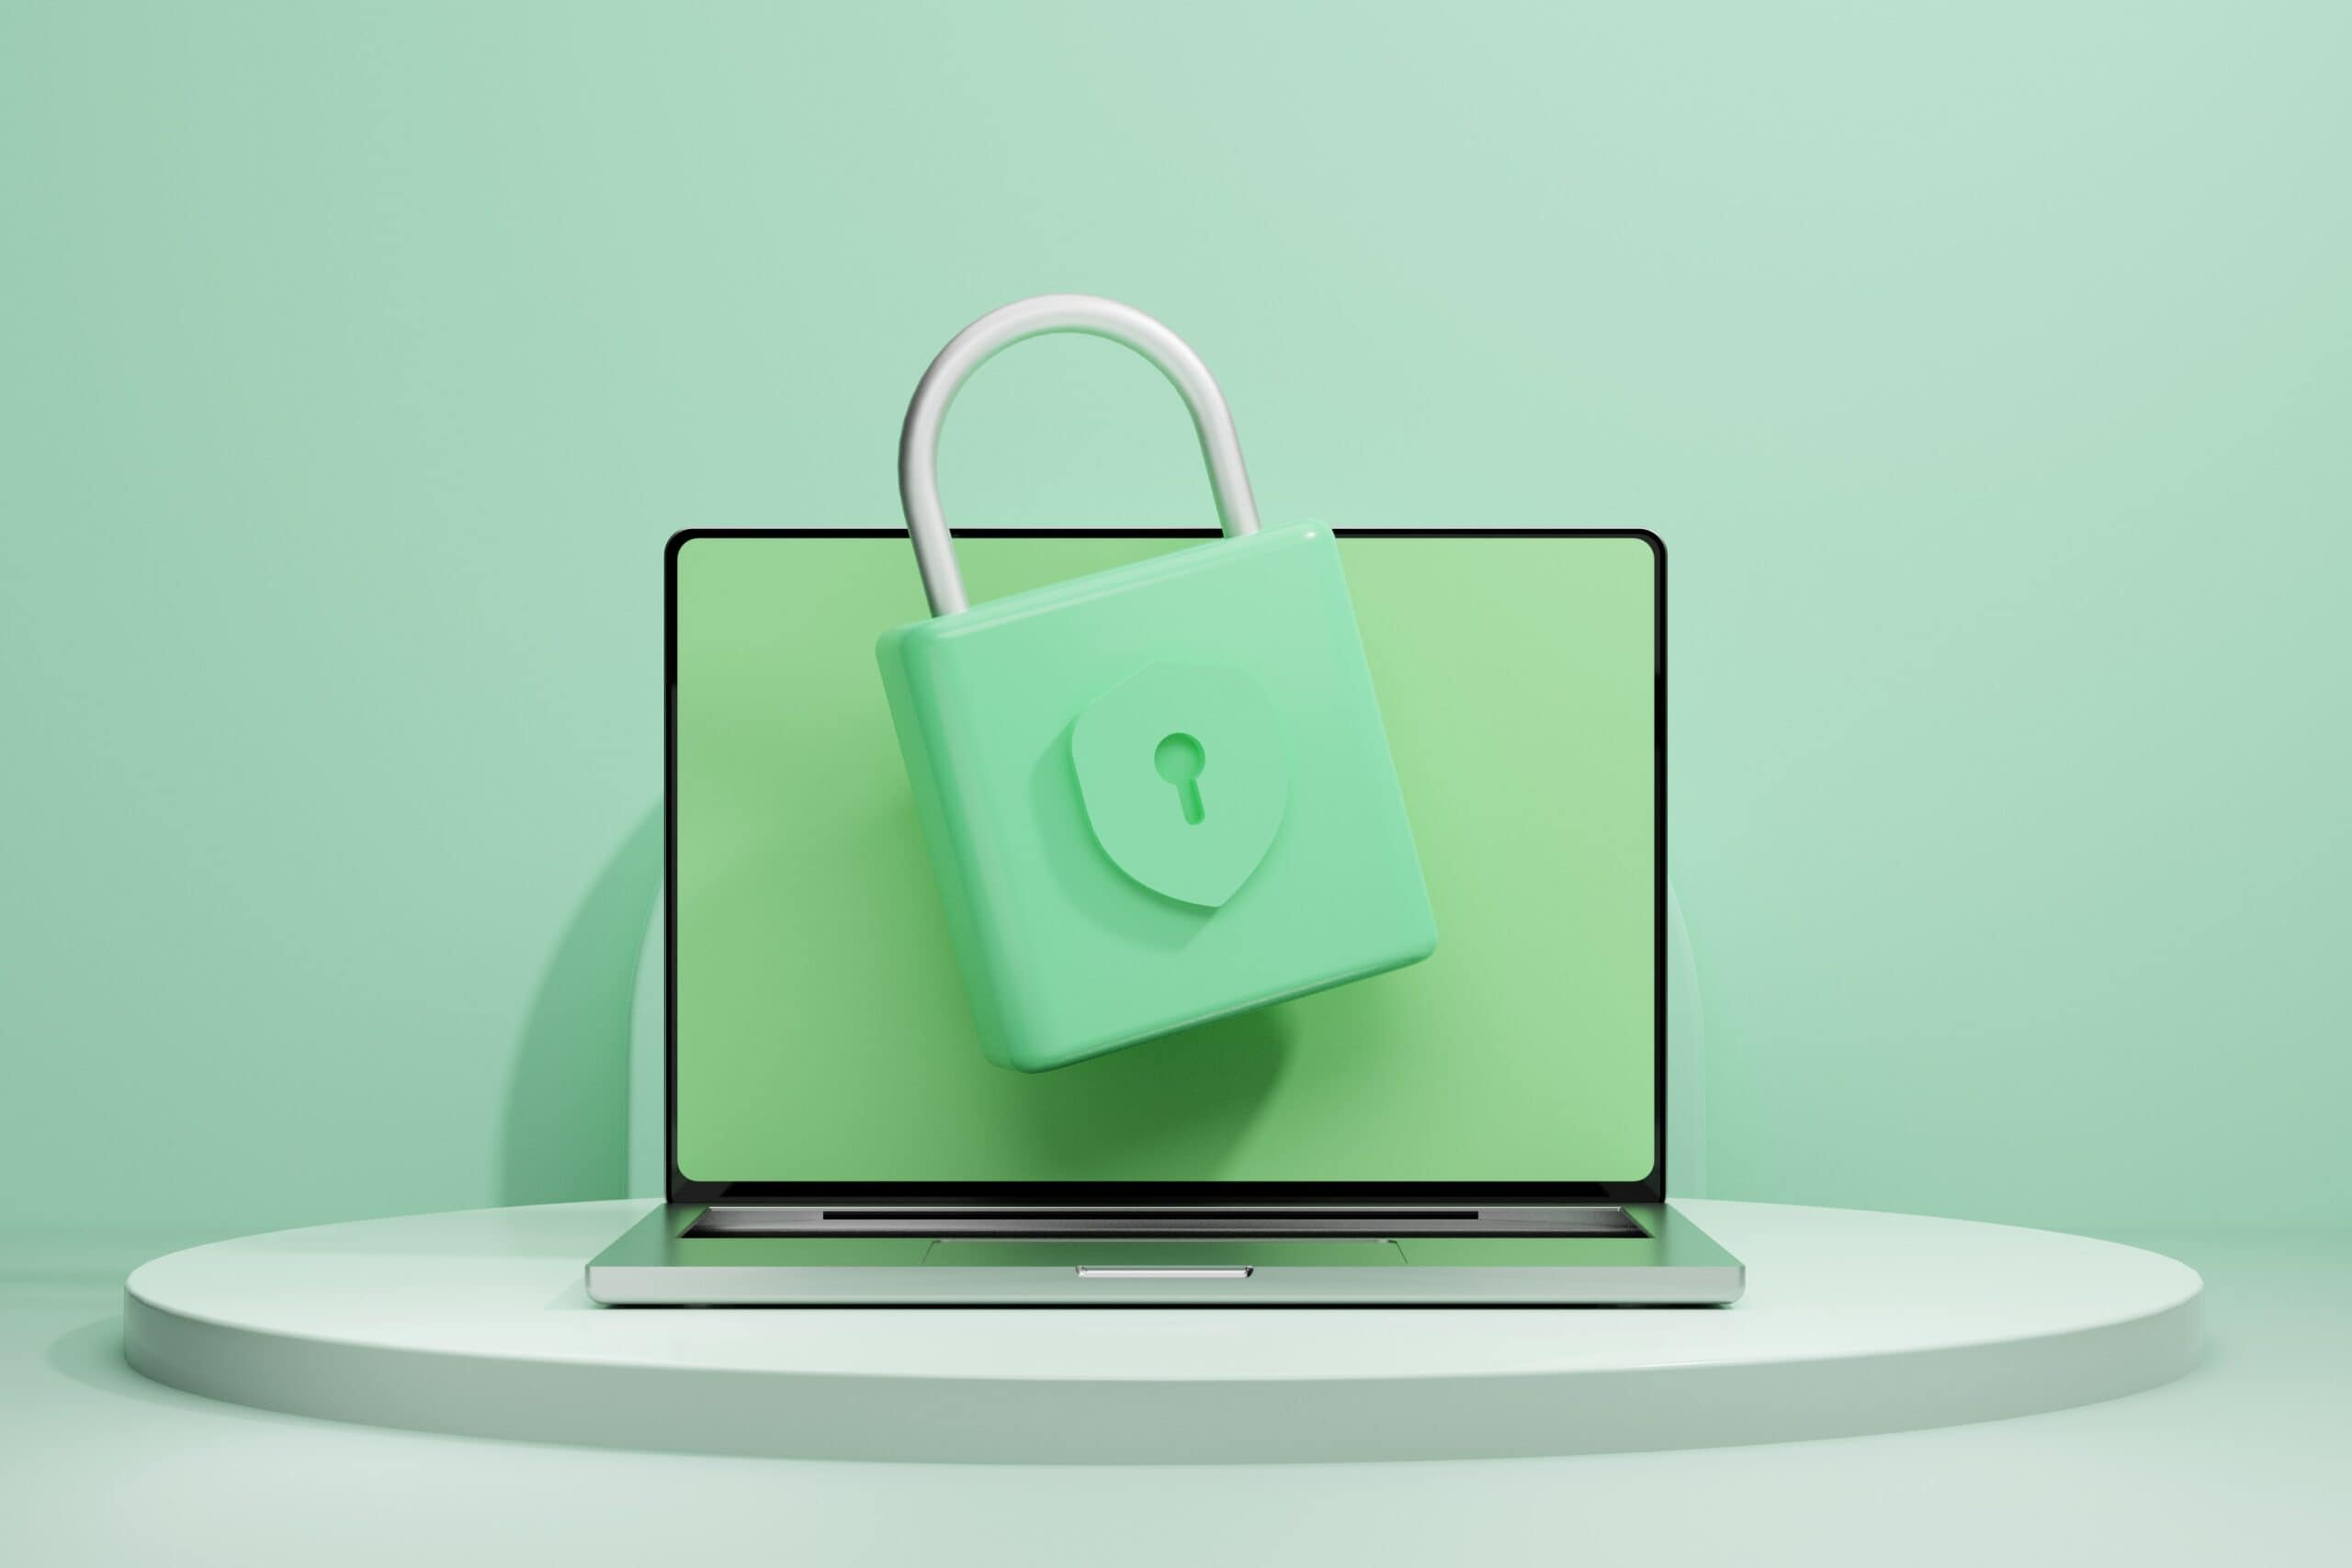 A green laptop with a padlock on it on a green background, symbolizing password security.